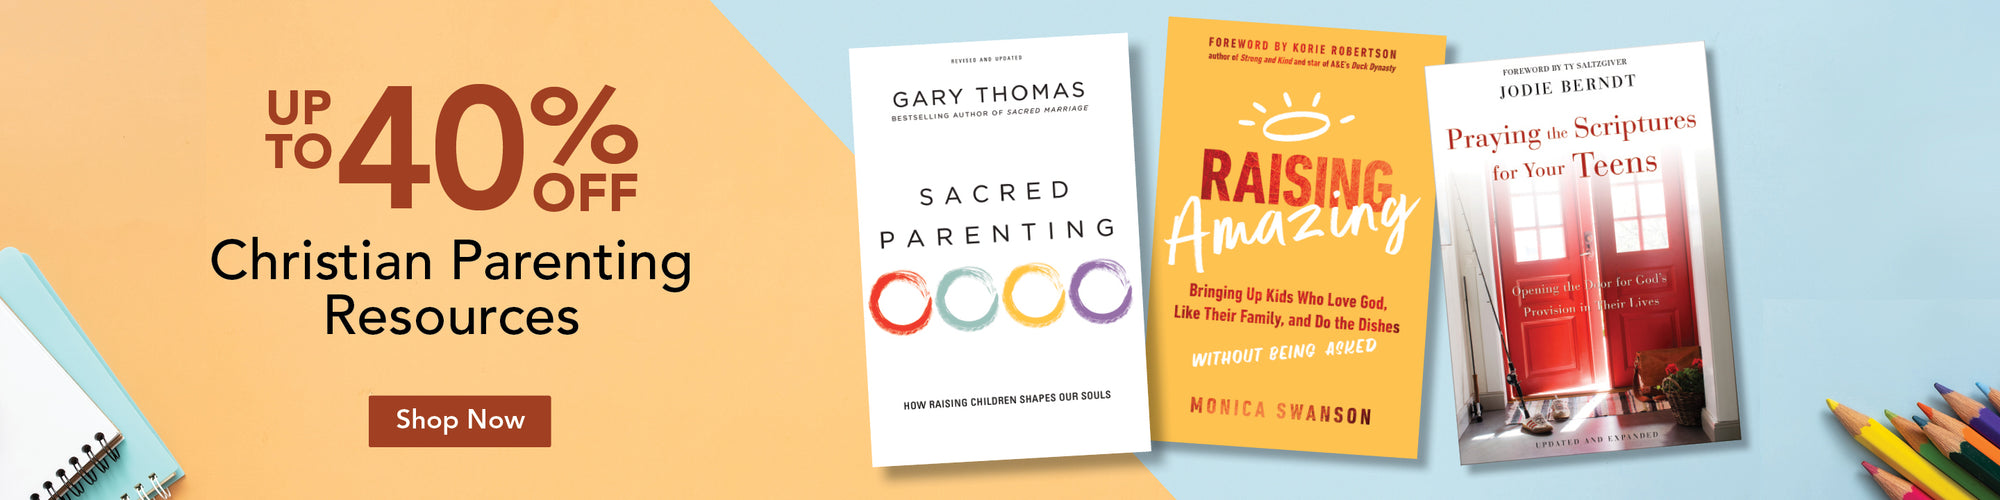 Up to 40% Off Christian Parenting Resources Shop Now